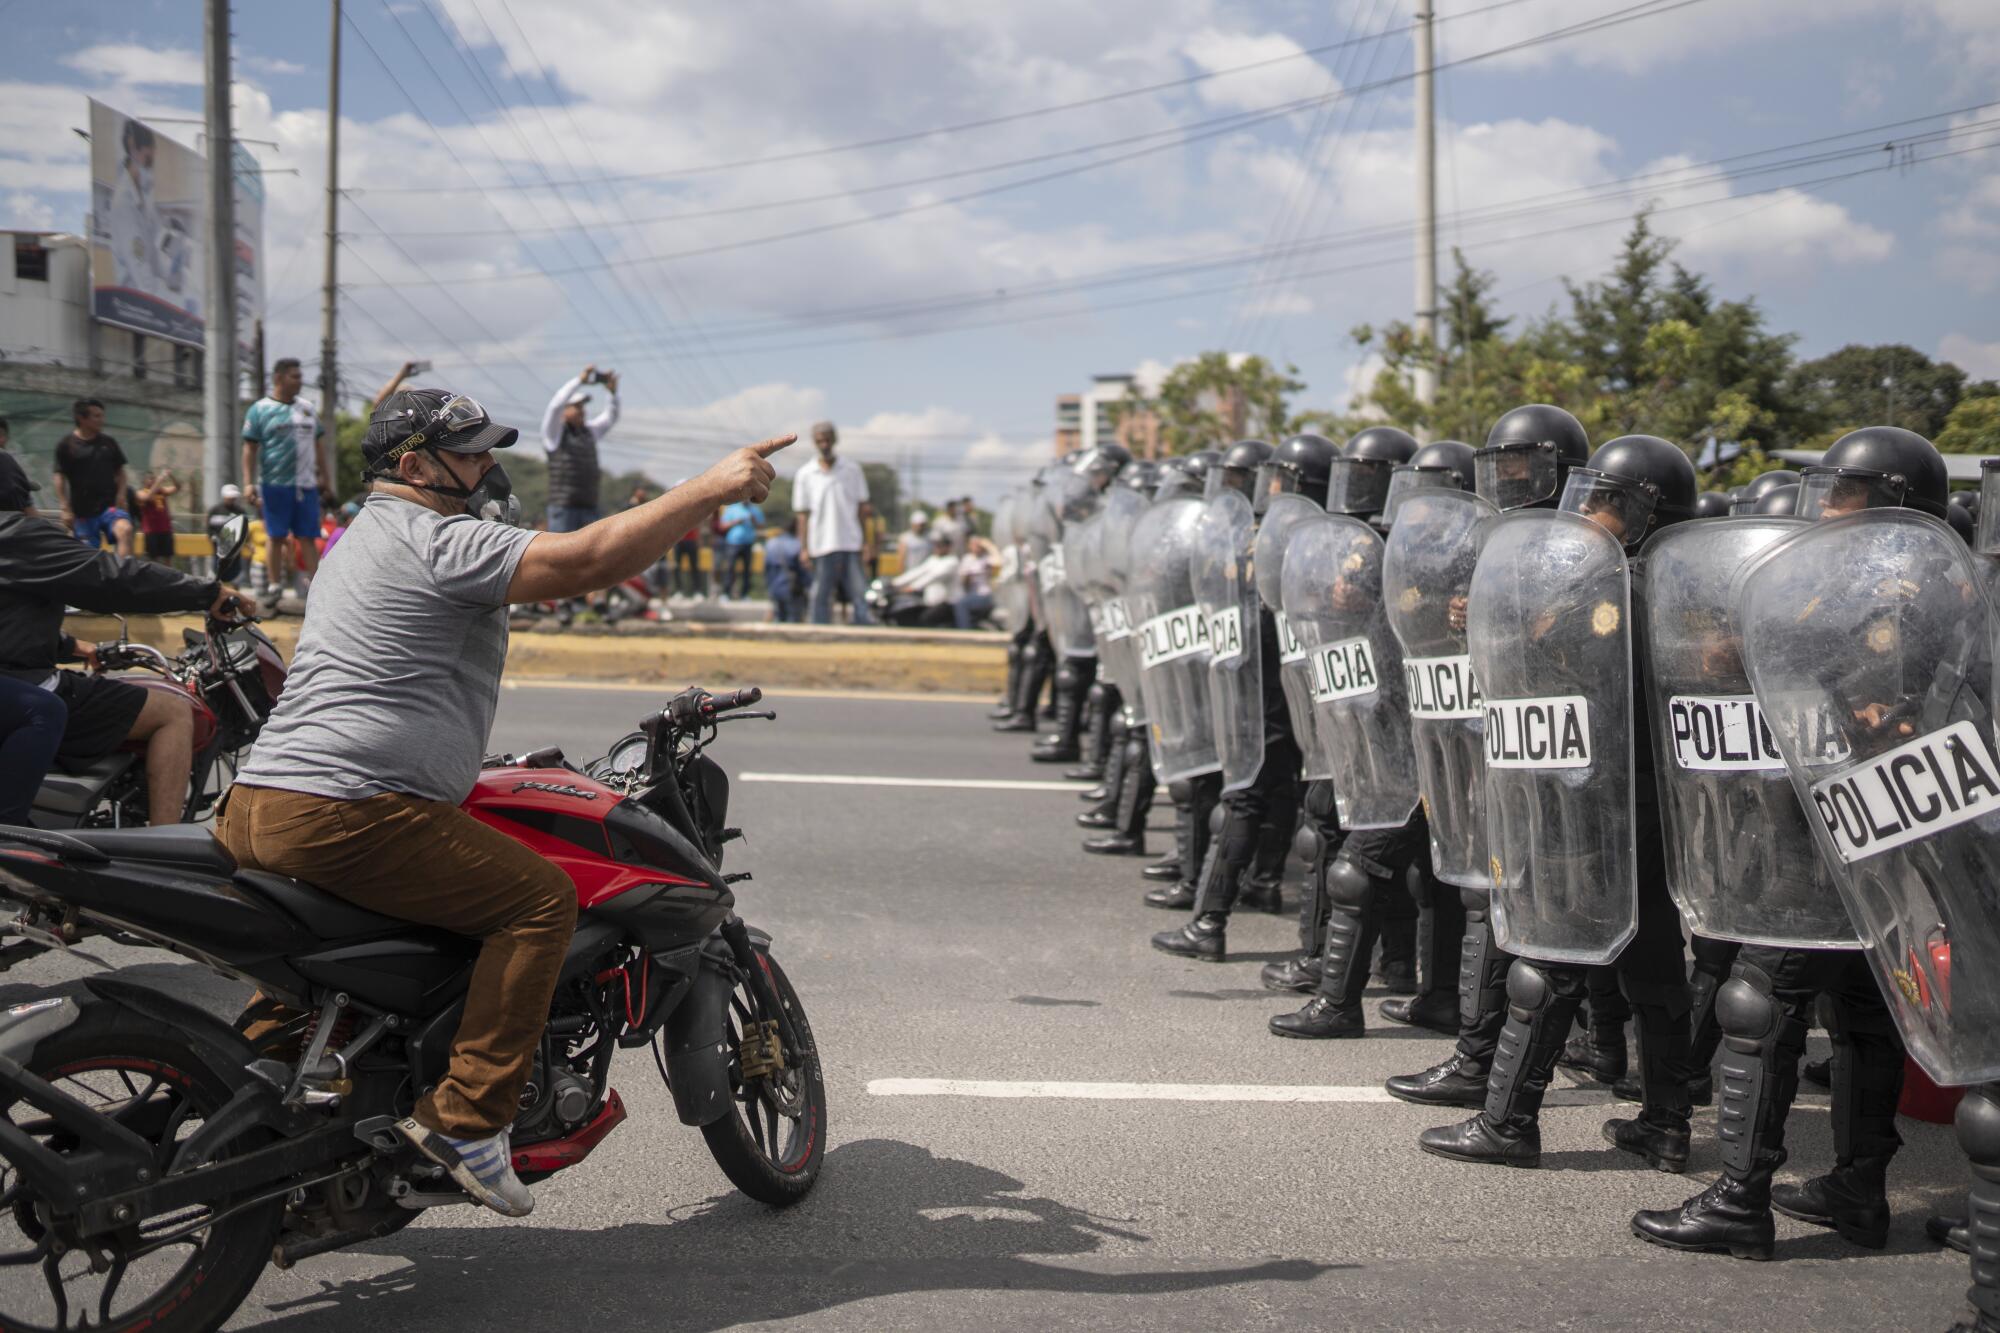 A demonstrator on a motorcycle pointing as he confronts a line of police in riot gear a few feet away as others look on